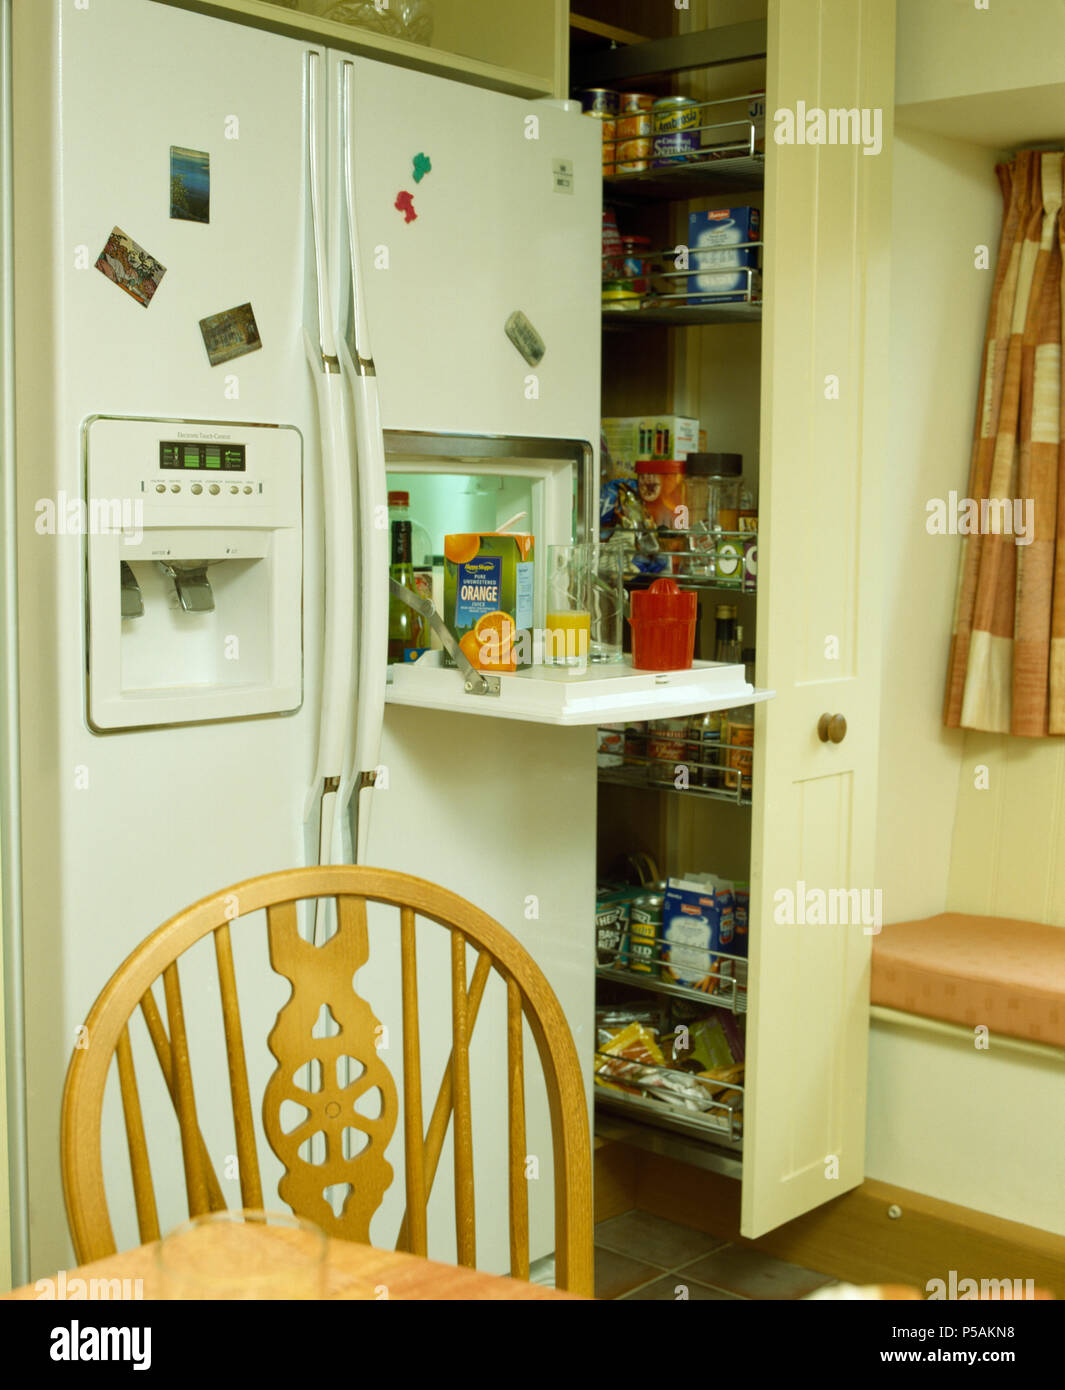 Kitchen with American style refrigerator and pull-out larder cupboard Stock Photo